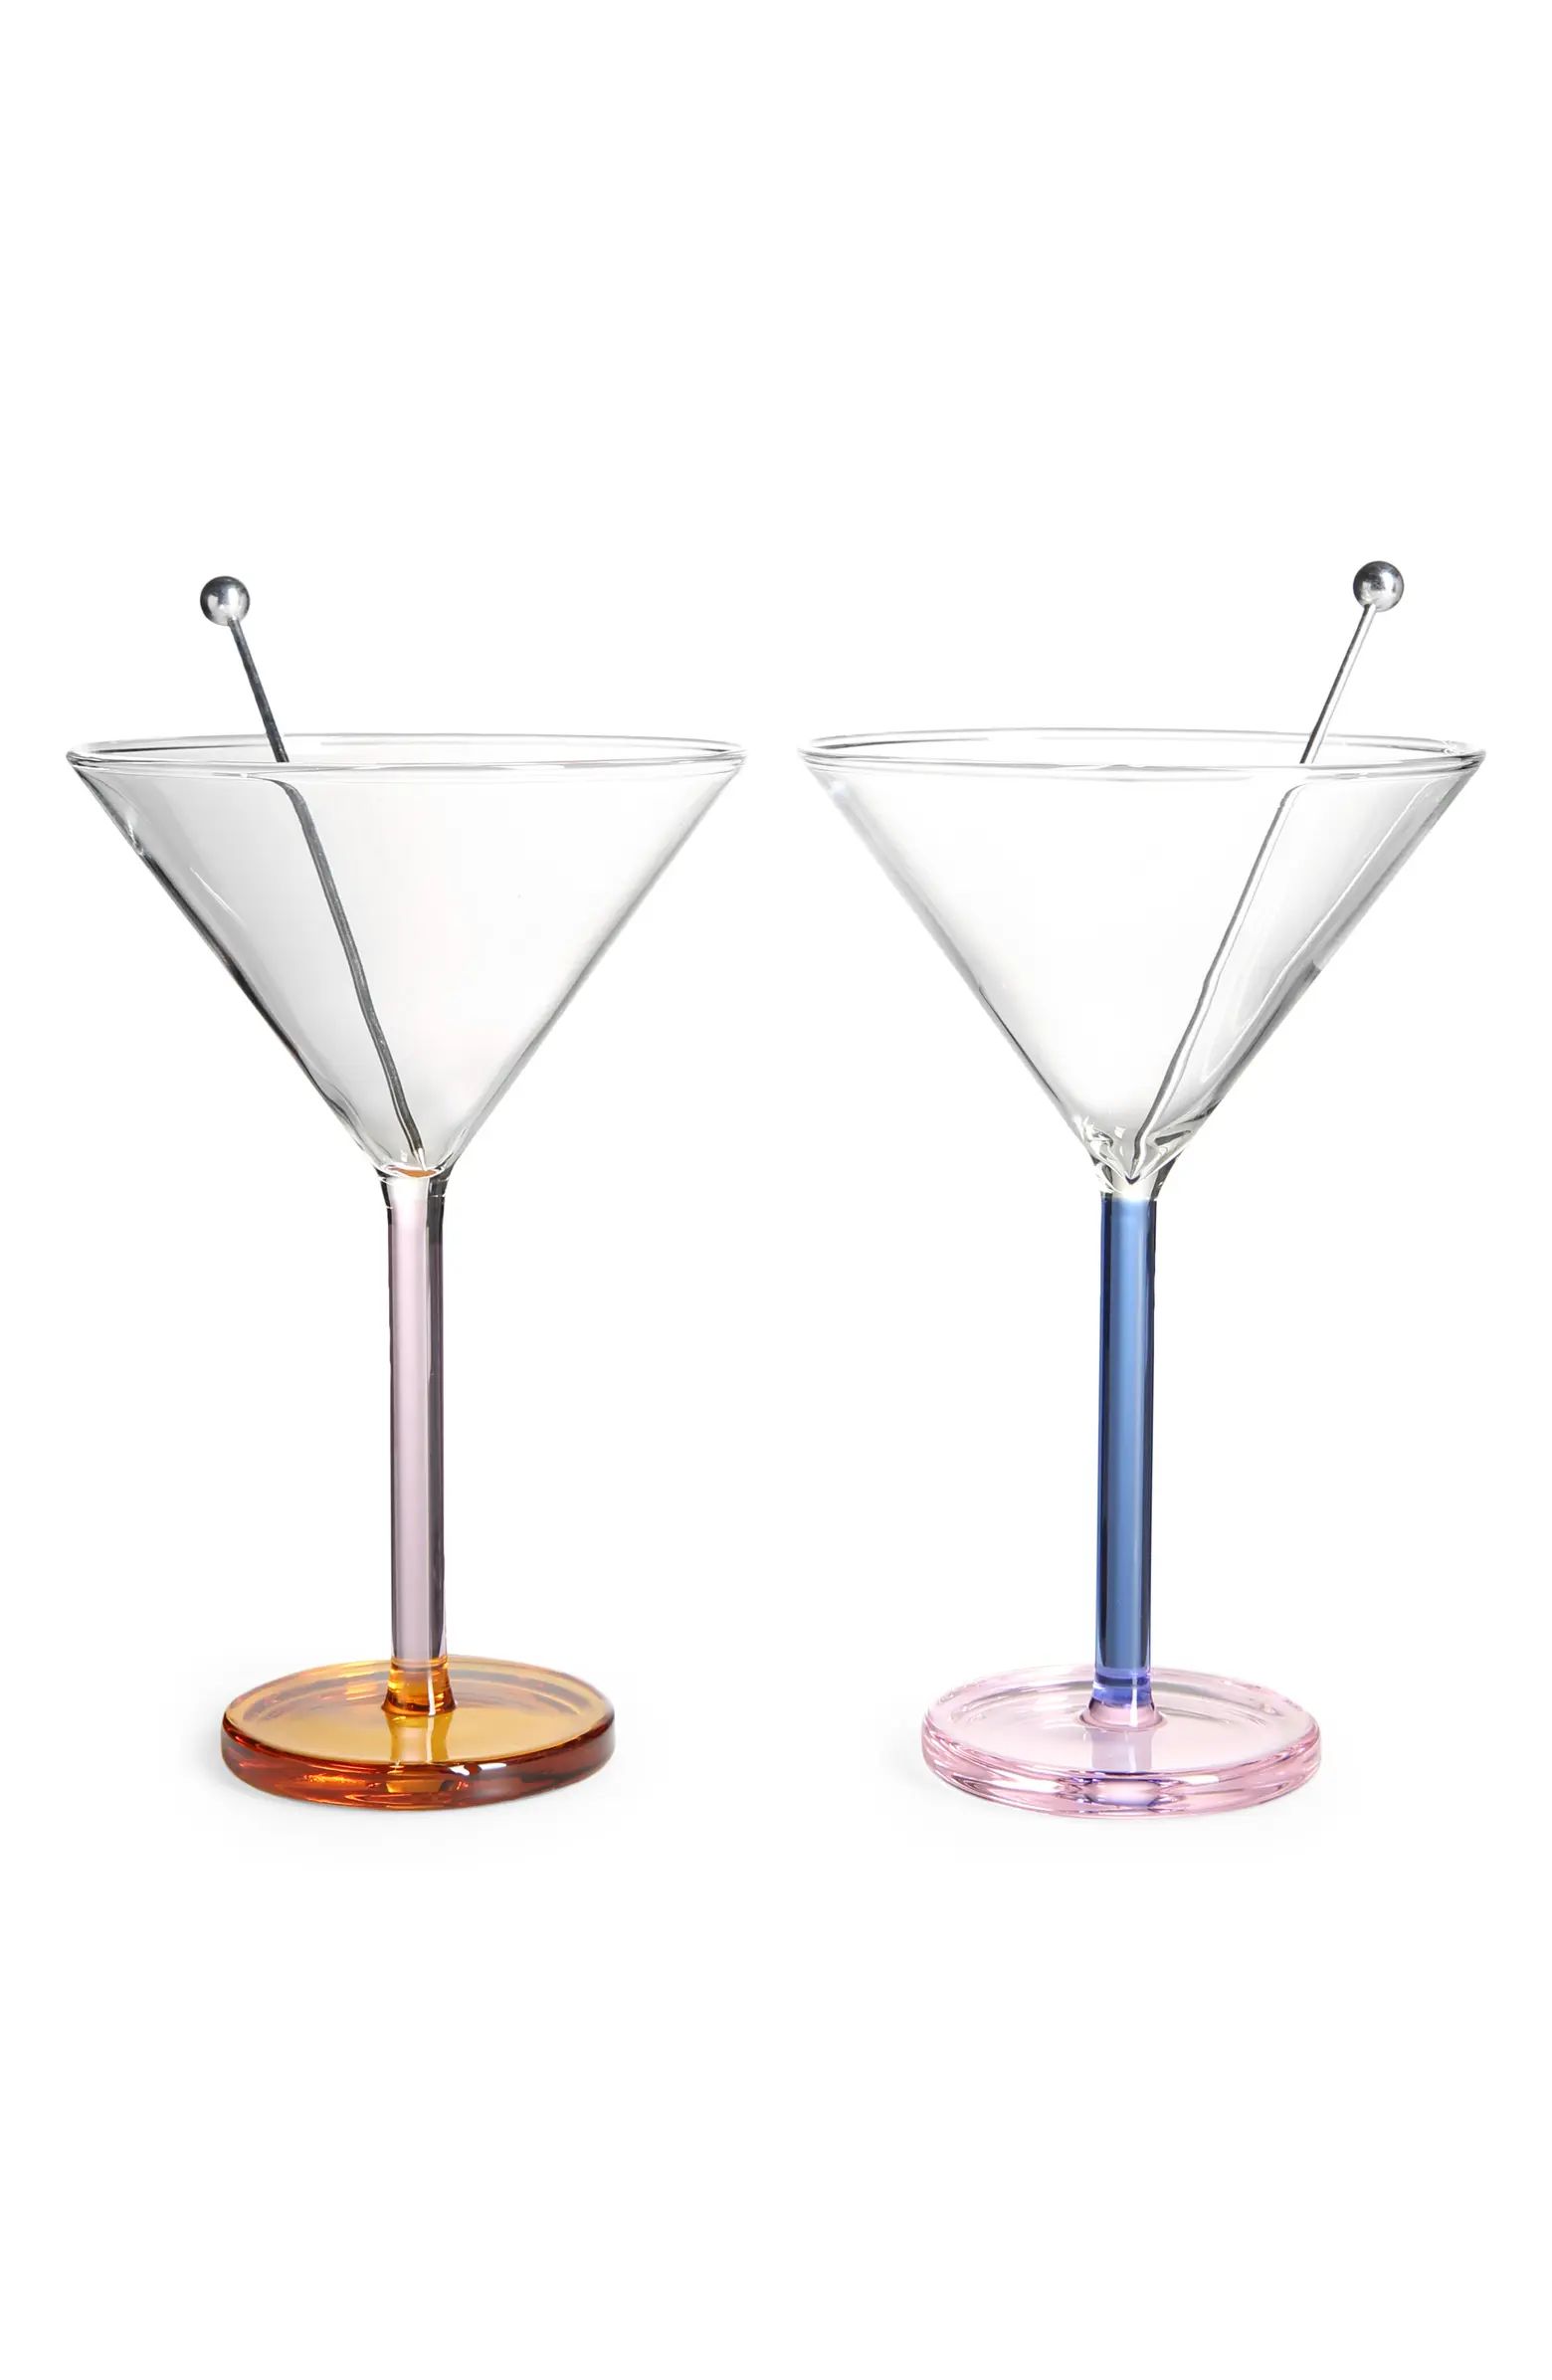 Piano 4-Piece Cocktail Set | Nordstrom